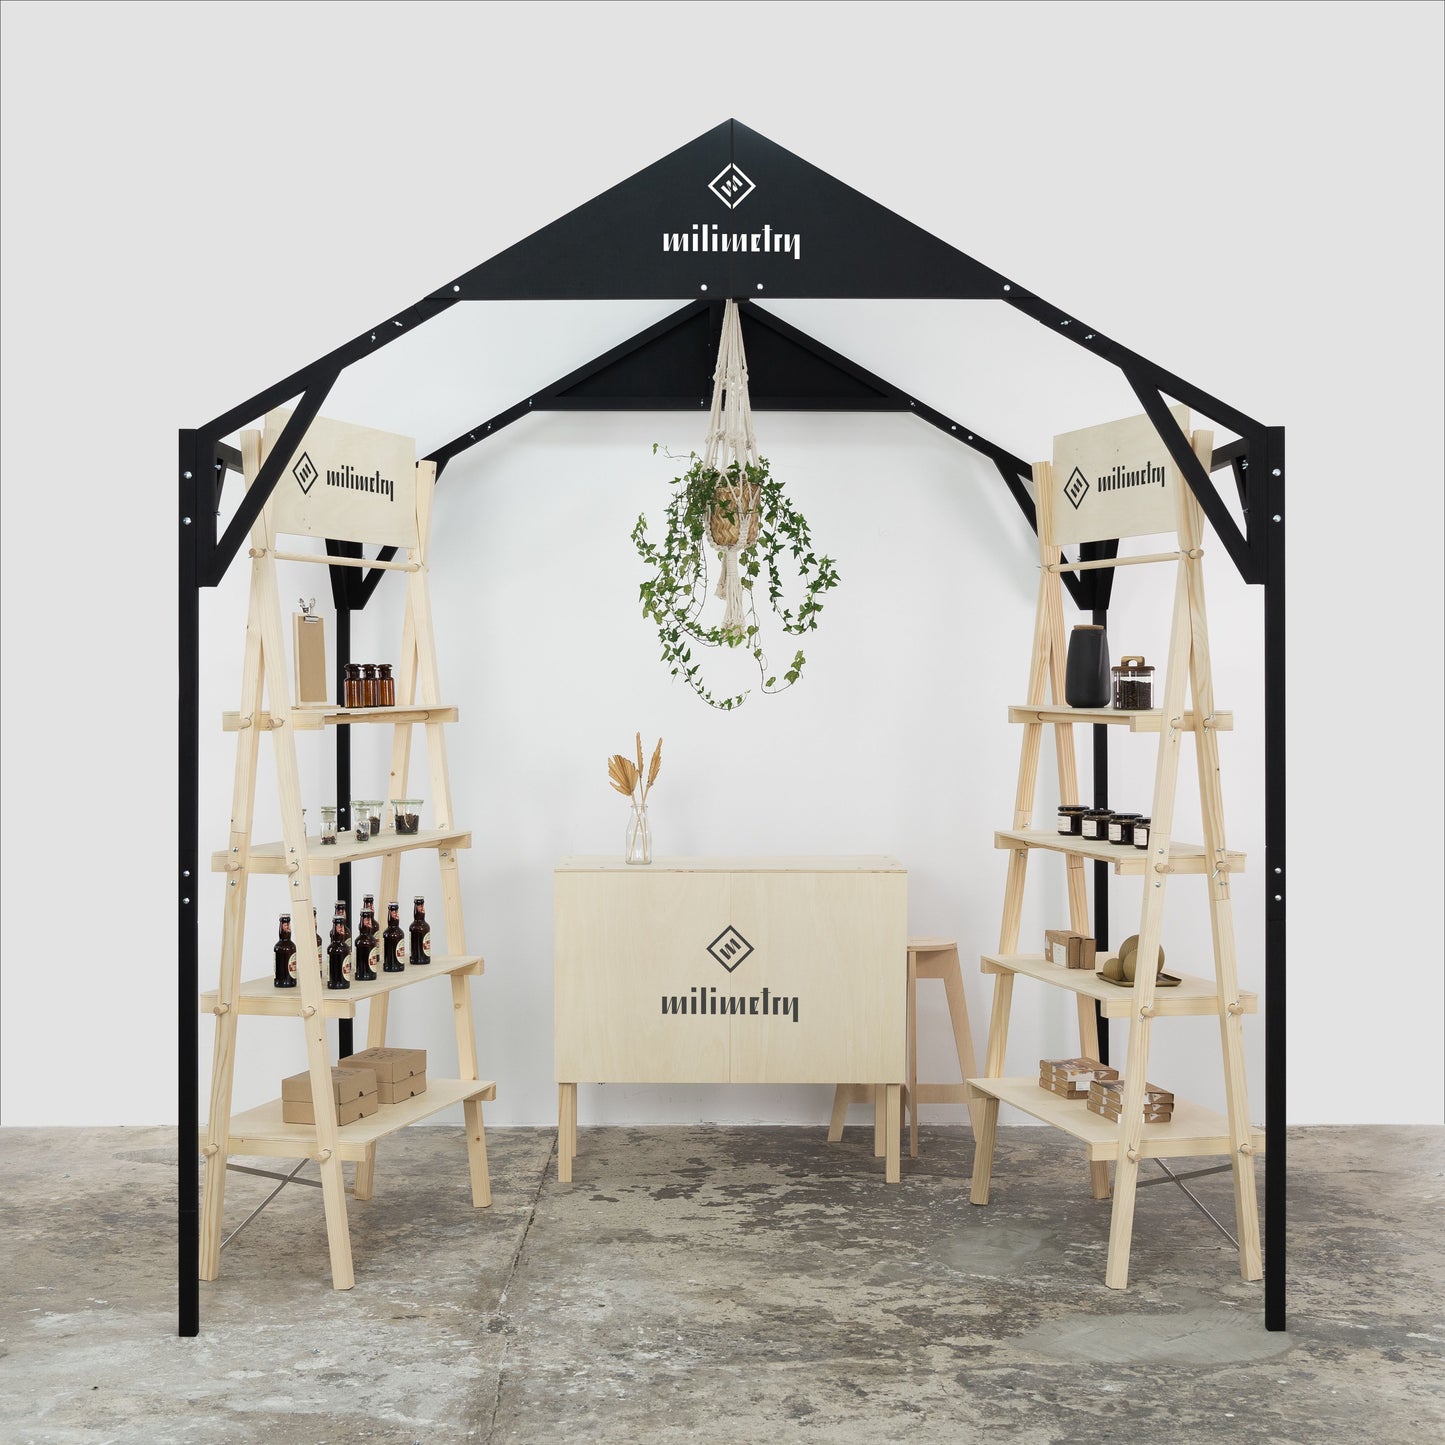 Trade show foldable wooden gazebo canopy VH-01, tent alternative, 6.5'x6.5', 8'x8', 10'x10' booth size